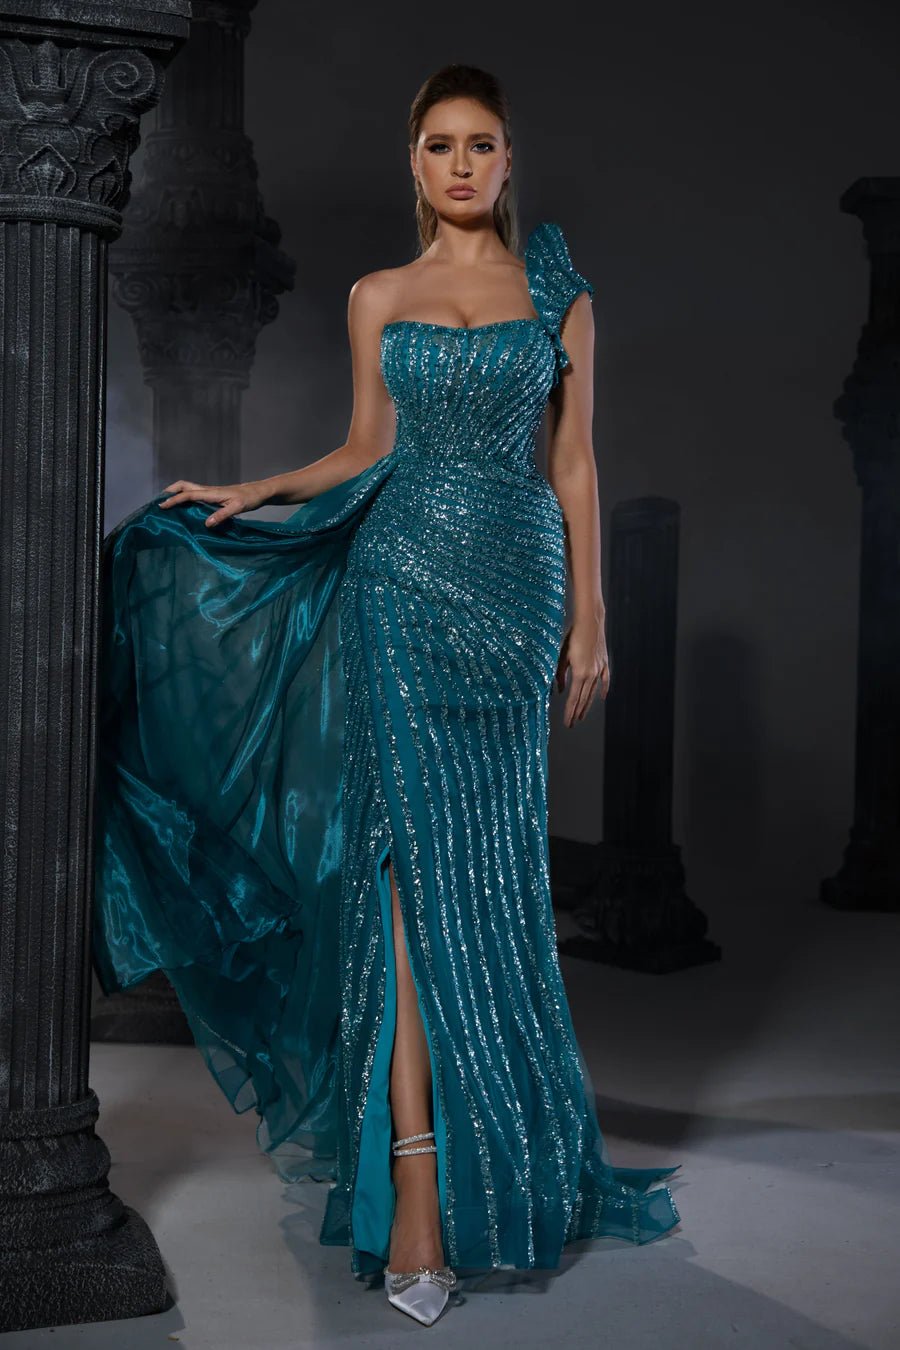 Luxurious Turq Sequin Evening Gown with One Shoulder and Slit - Pretty Sequin Dress andDesigner Sequin Gown Plus Size - WonderlandByLilian